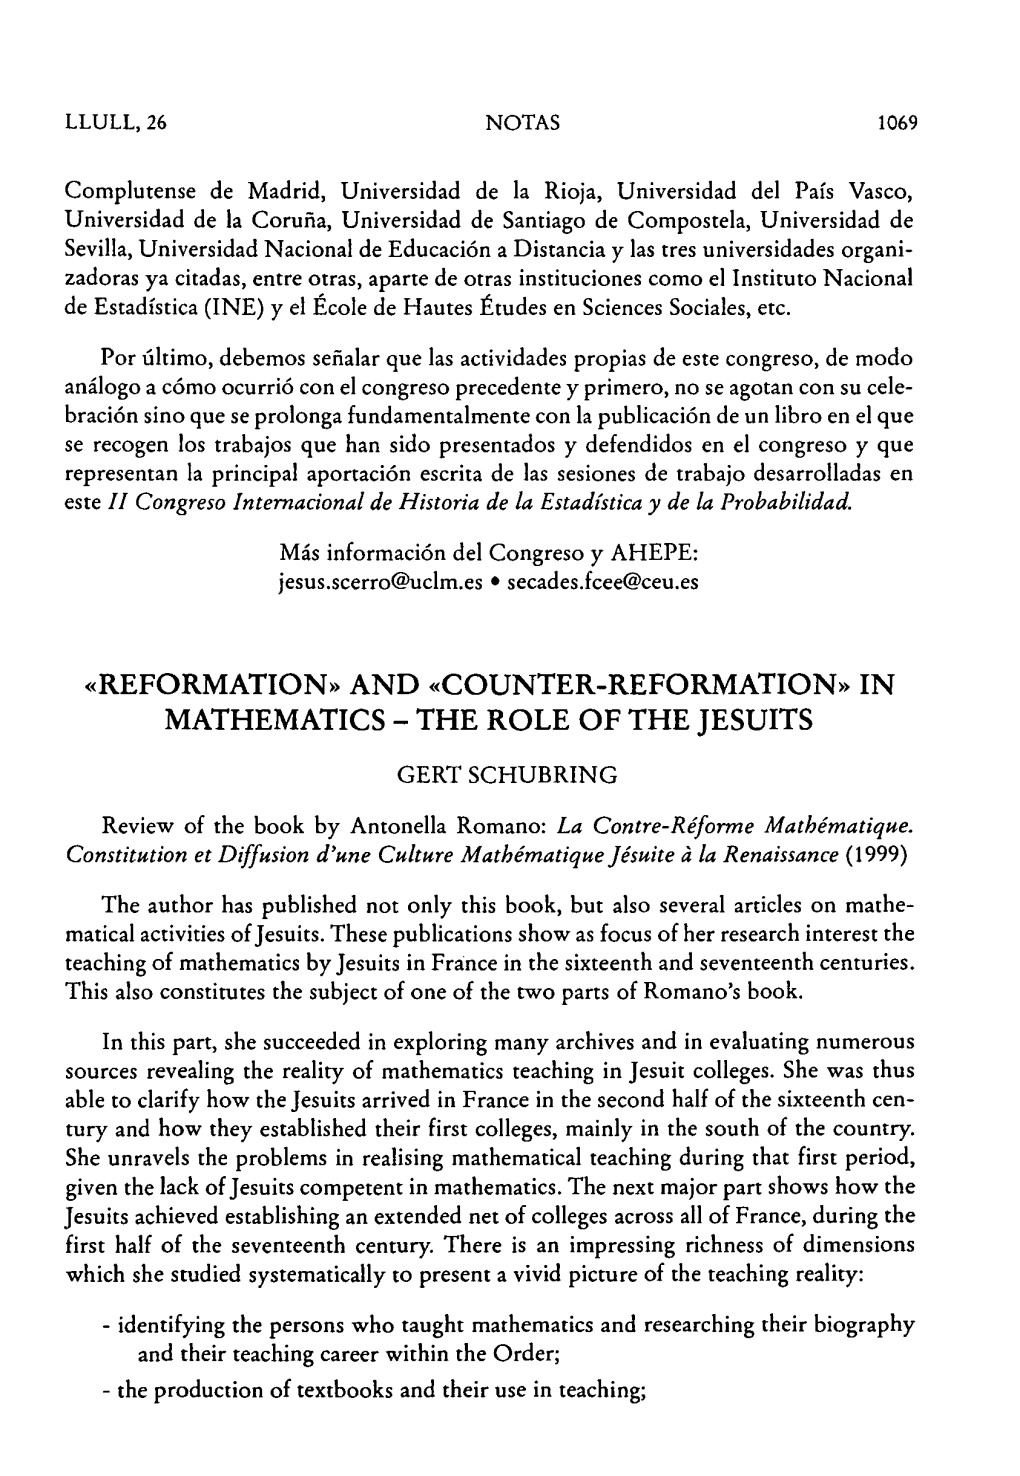 And «Counter-Reformation» in Mathematics - the Role of the Jesuits